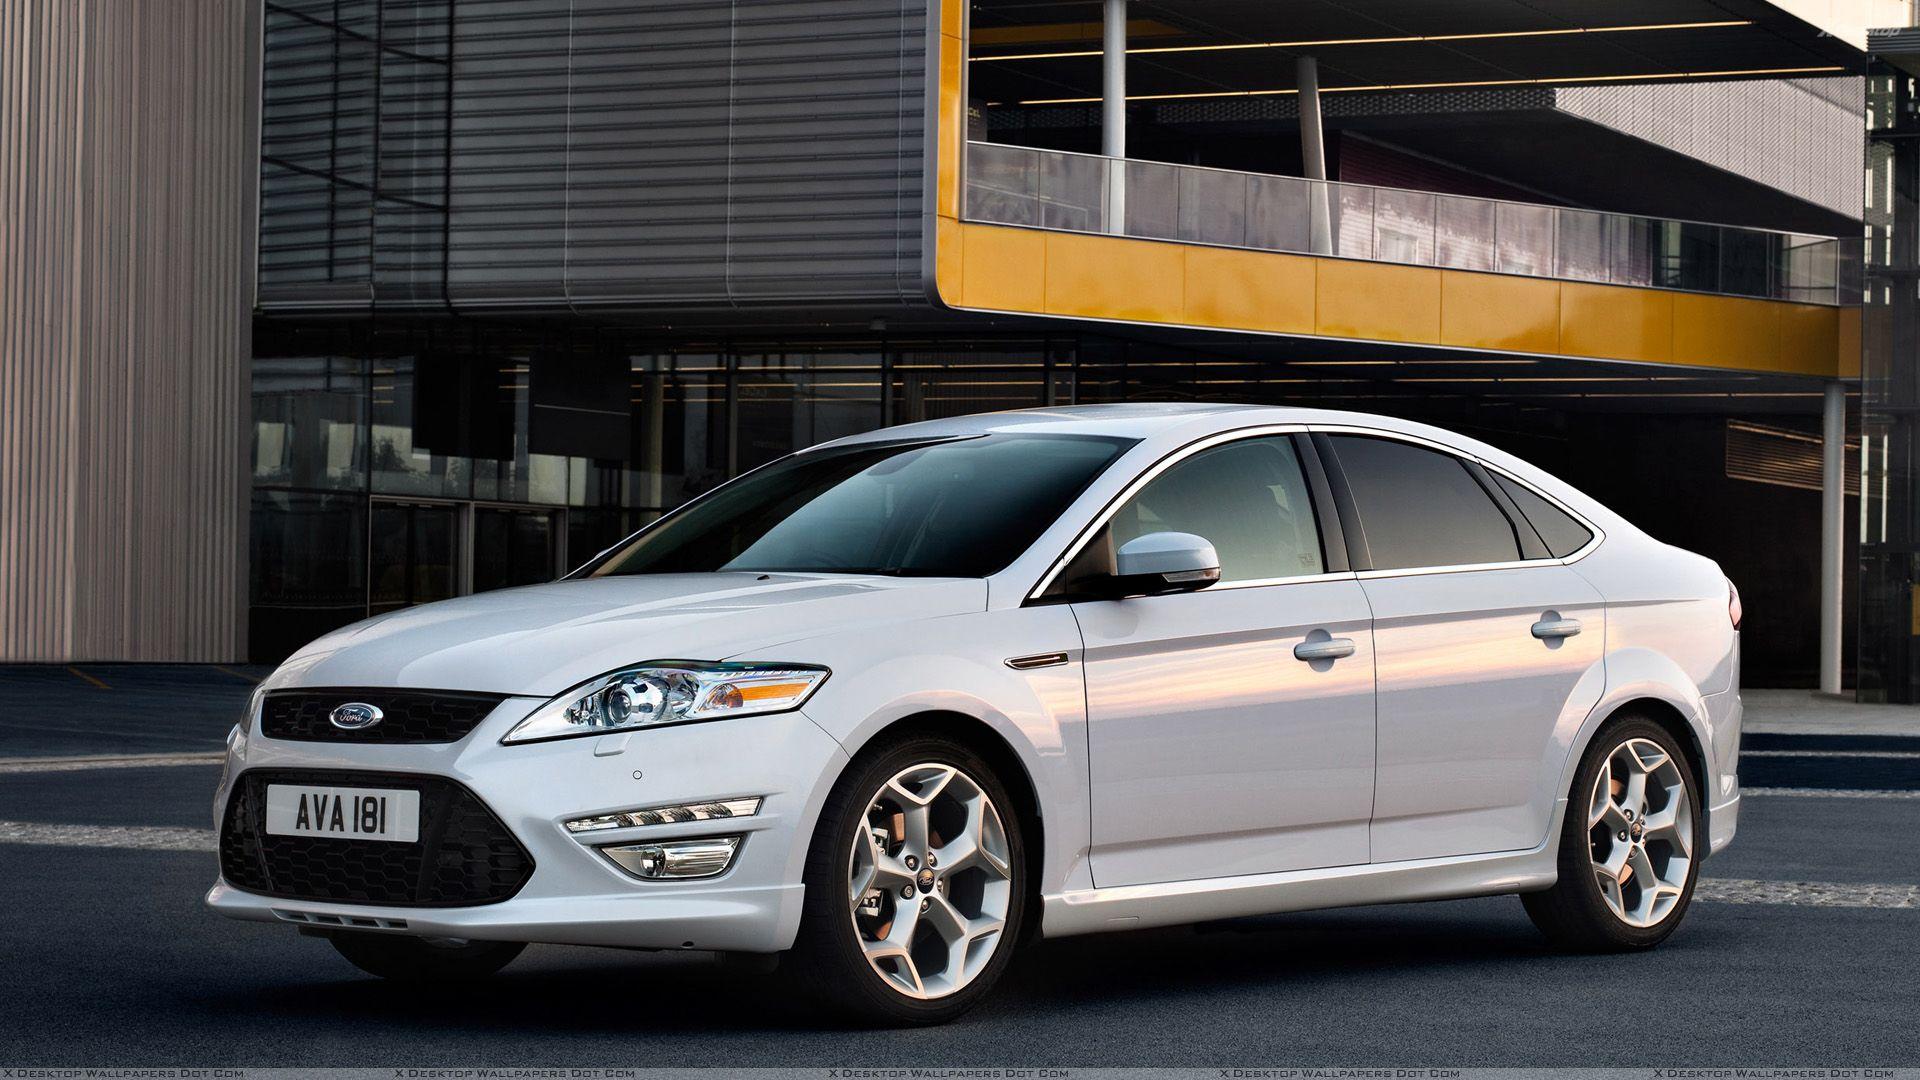 Ford Mondeo Wallpapers, Photos & Wallpaper in HD